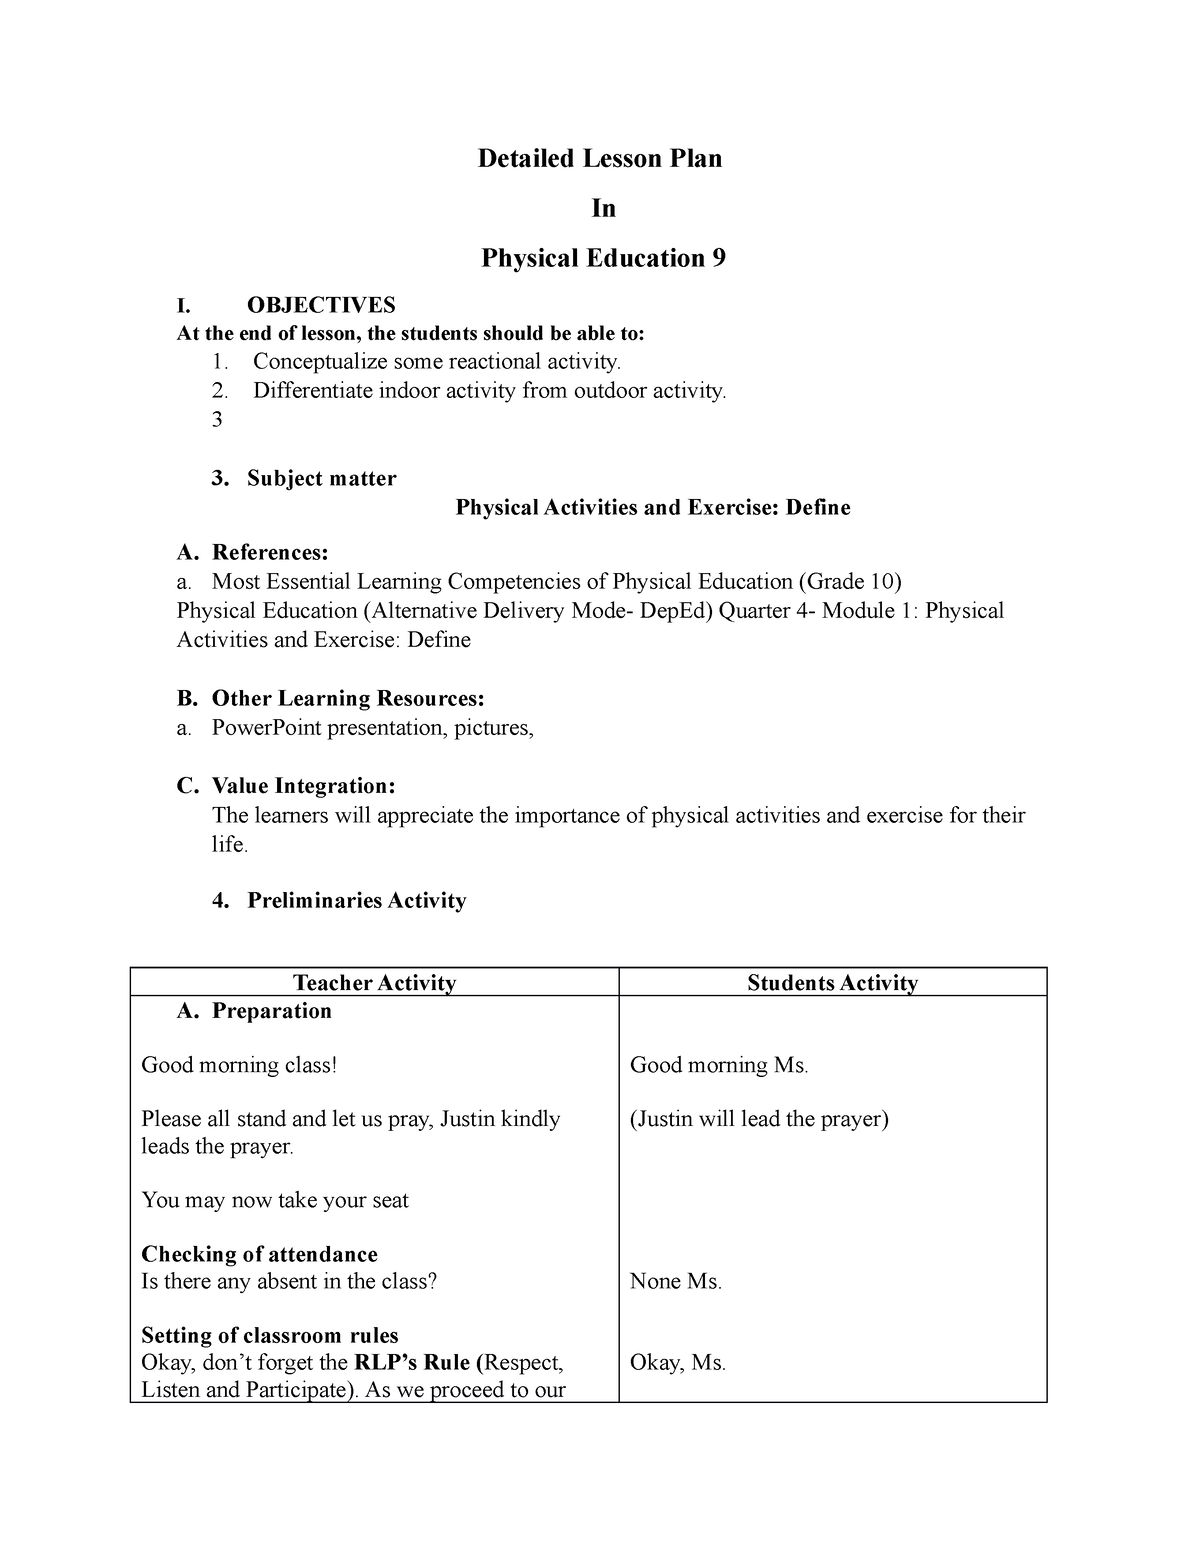 detailed-lesson-plan-in-physical-education-10-detailed-lesson-plan-in